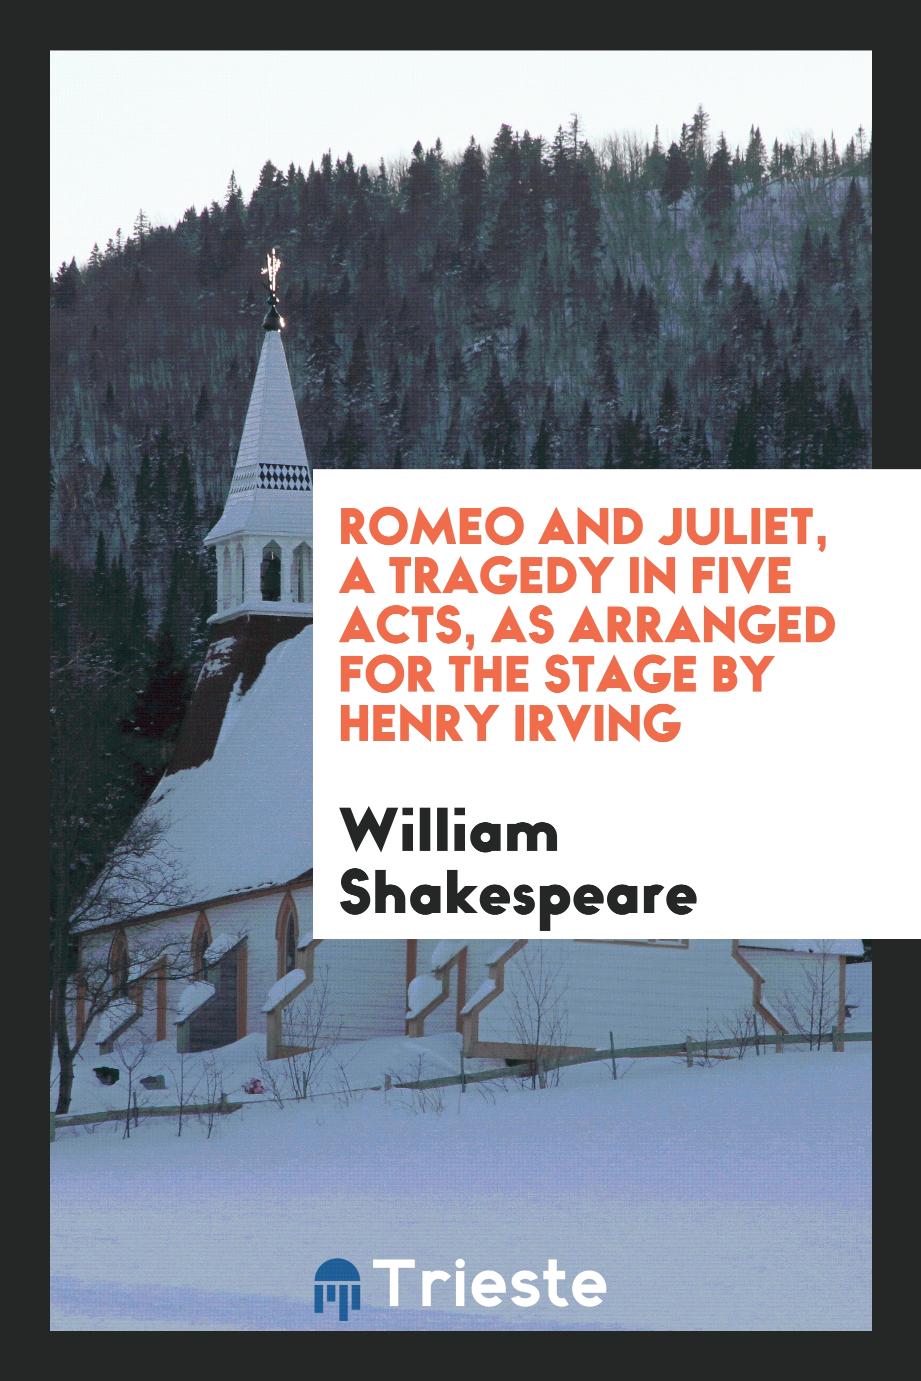 Romeo and Juliet, a tragedy in five acts, as arranged for the stage by Henry Irving